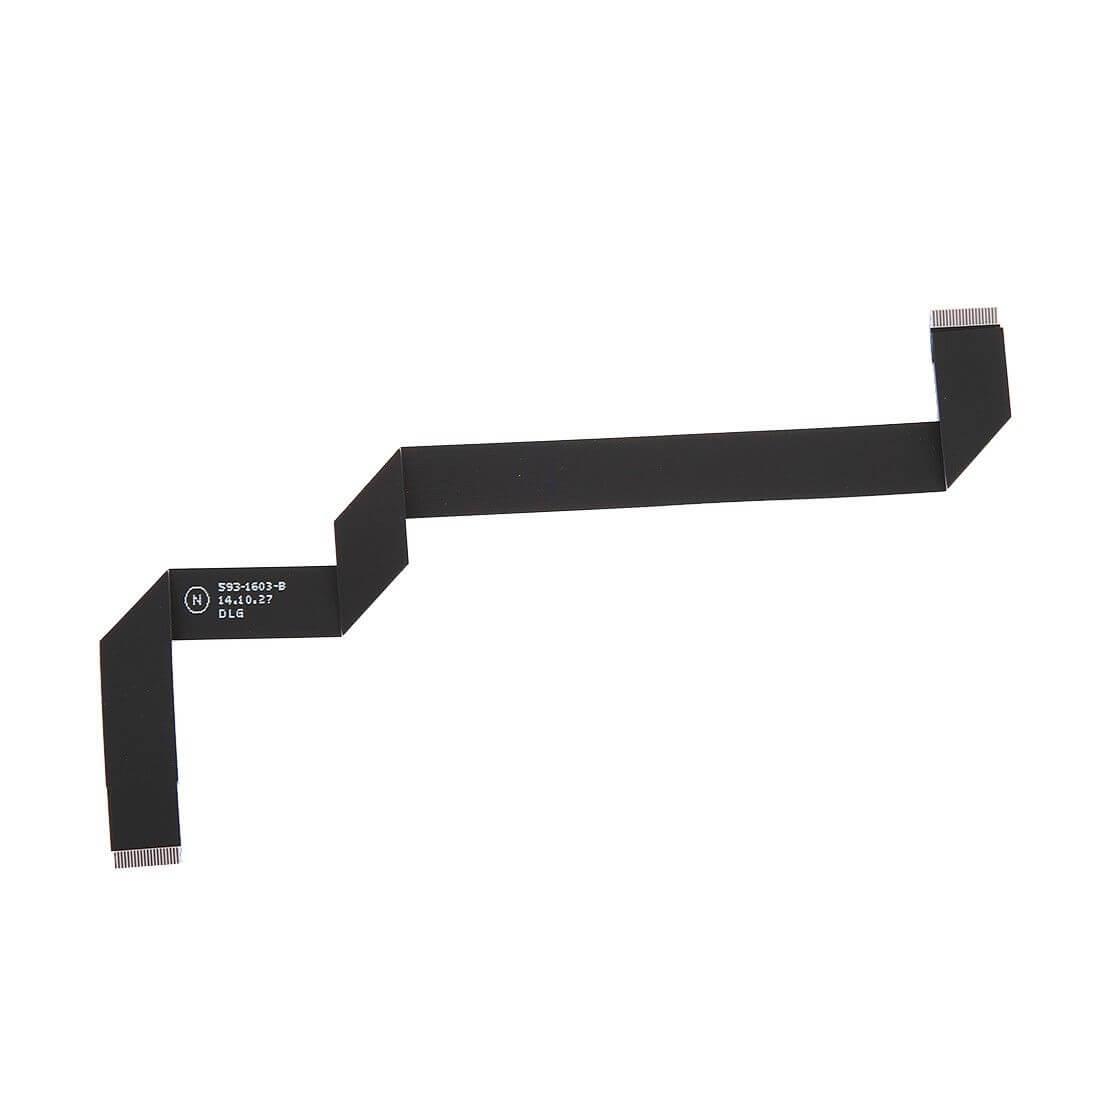 For Apple MacBook Air 11" A1465 Trackpad Touchpad Flex Cable 593-1603-B 2012-2015